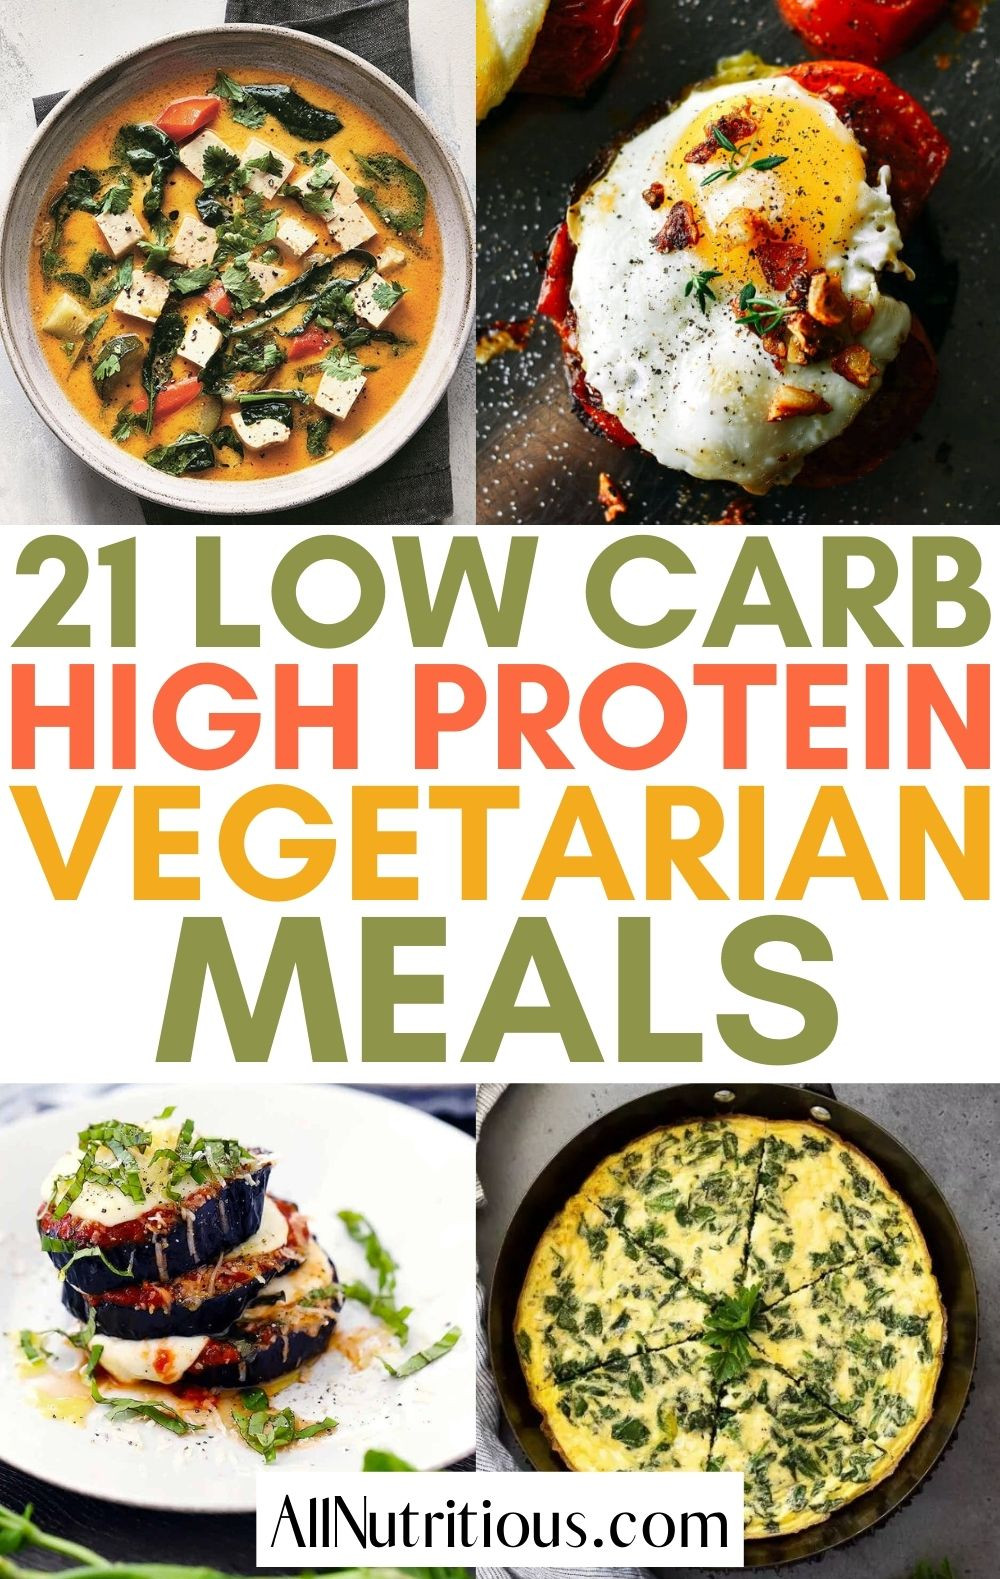 15 Best High Protein Low Carb Vegetarian